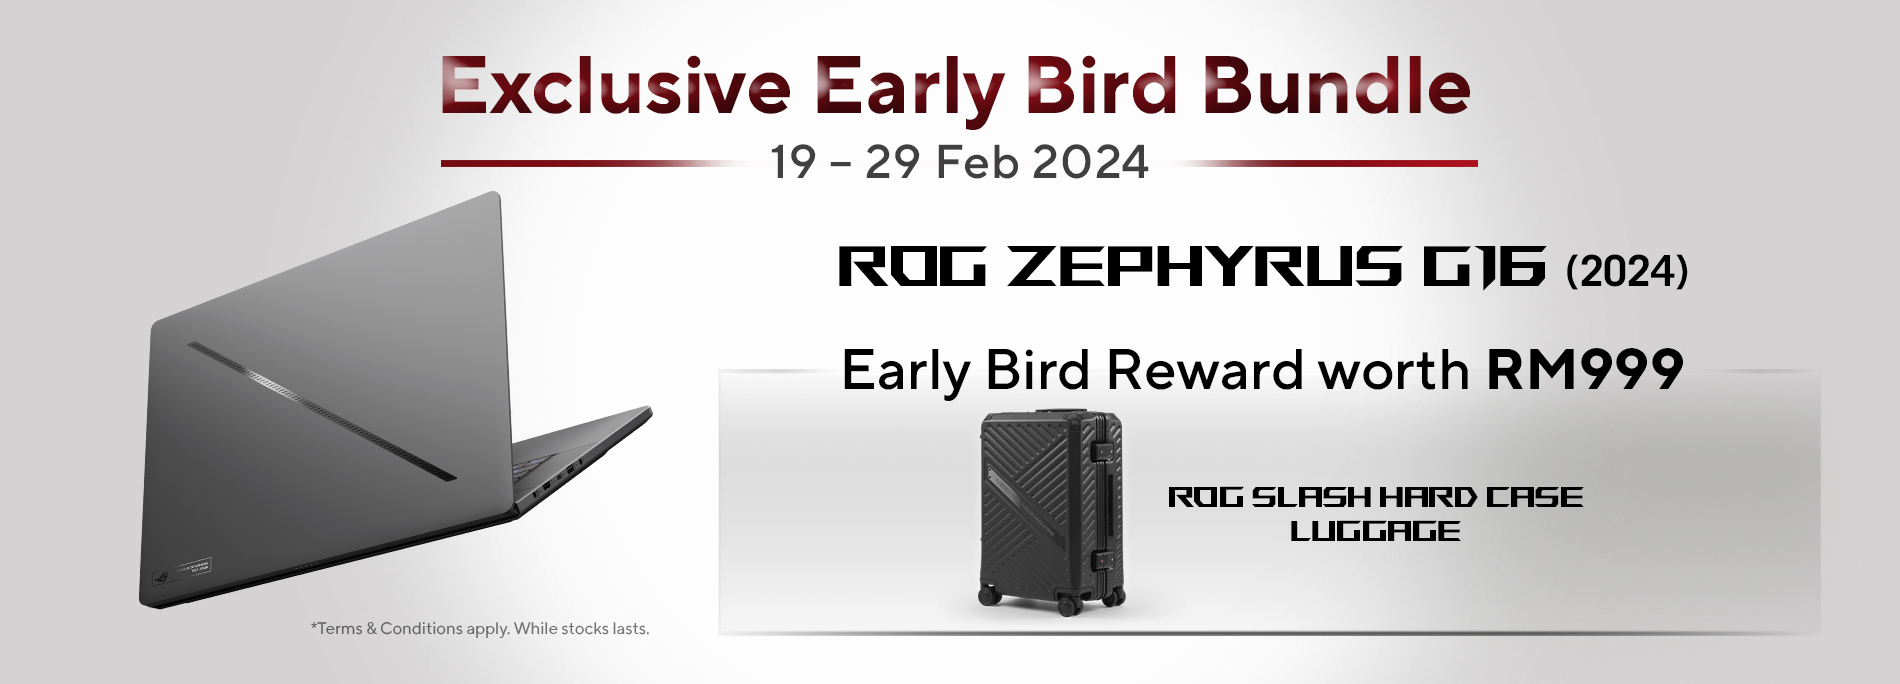 ROG Zephyrus G16 (2024): Available Now with Early Bird Reward worth RM999